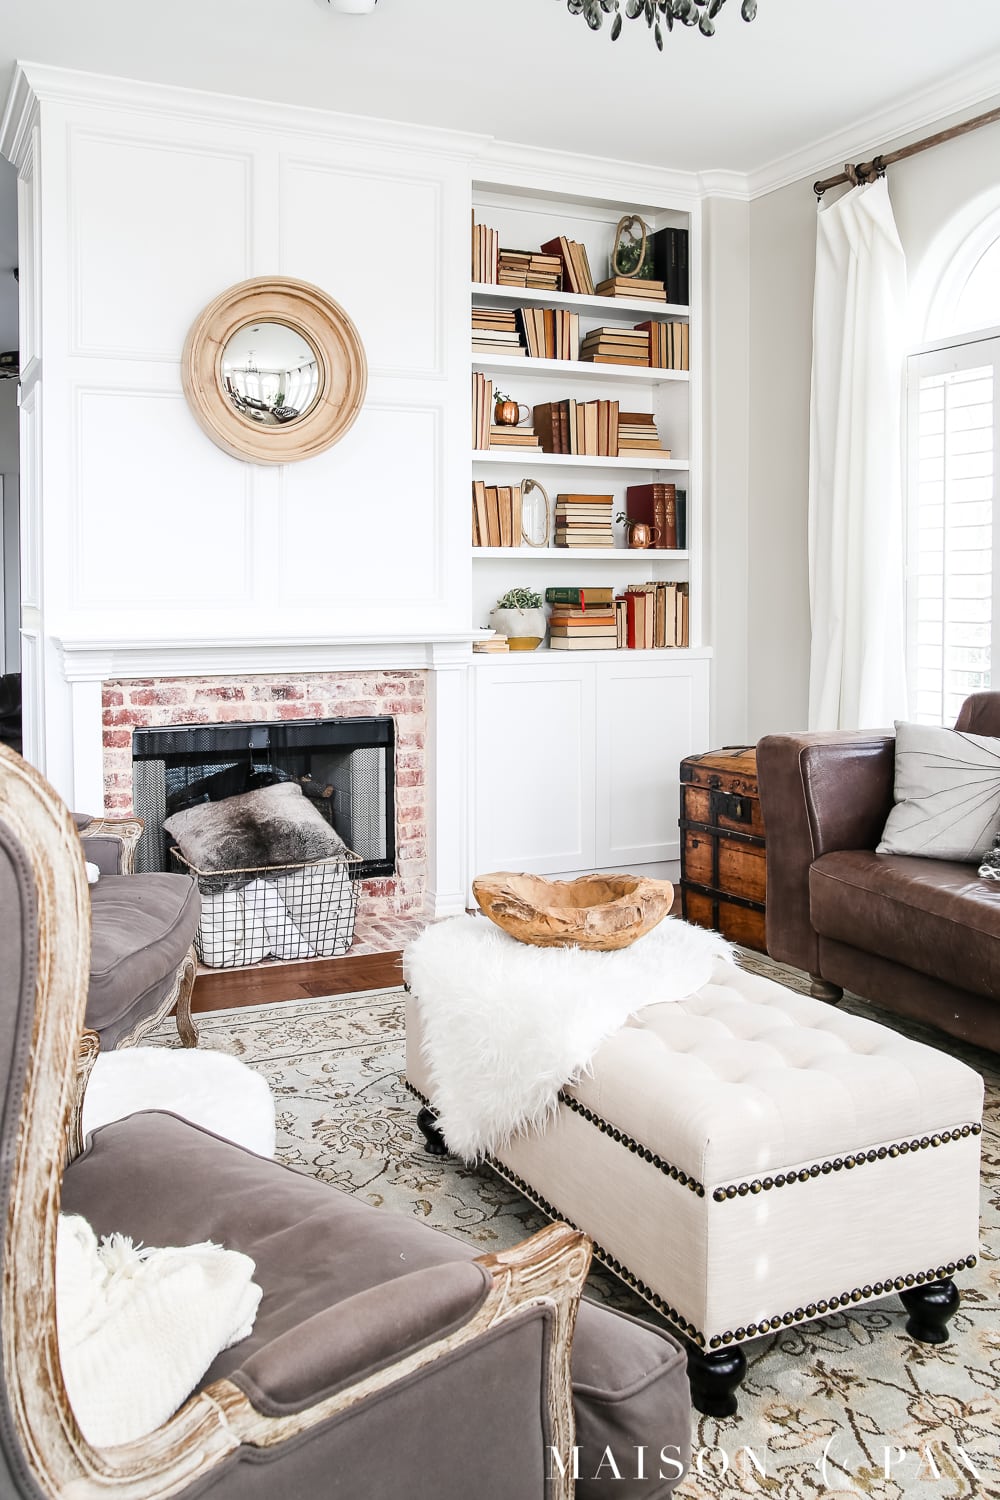 White painted fireplace with built-in with neutral books in a modern farmhouse living room- Maison de Pax